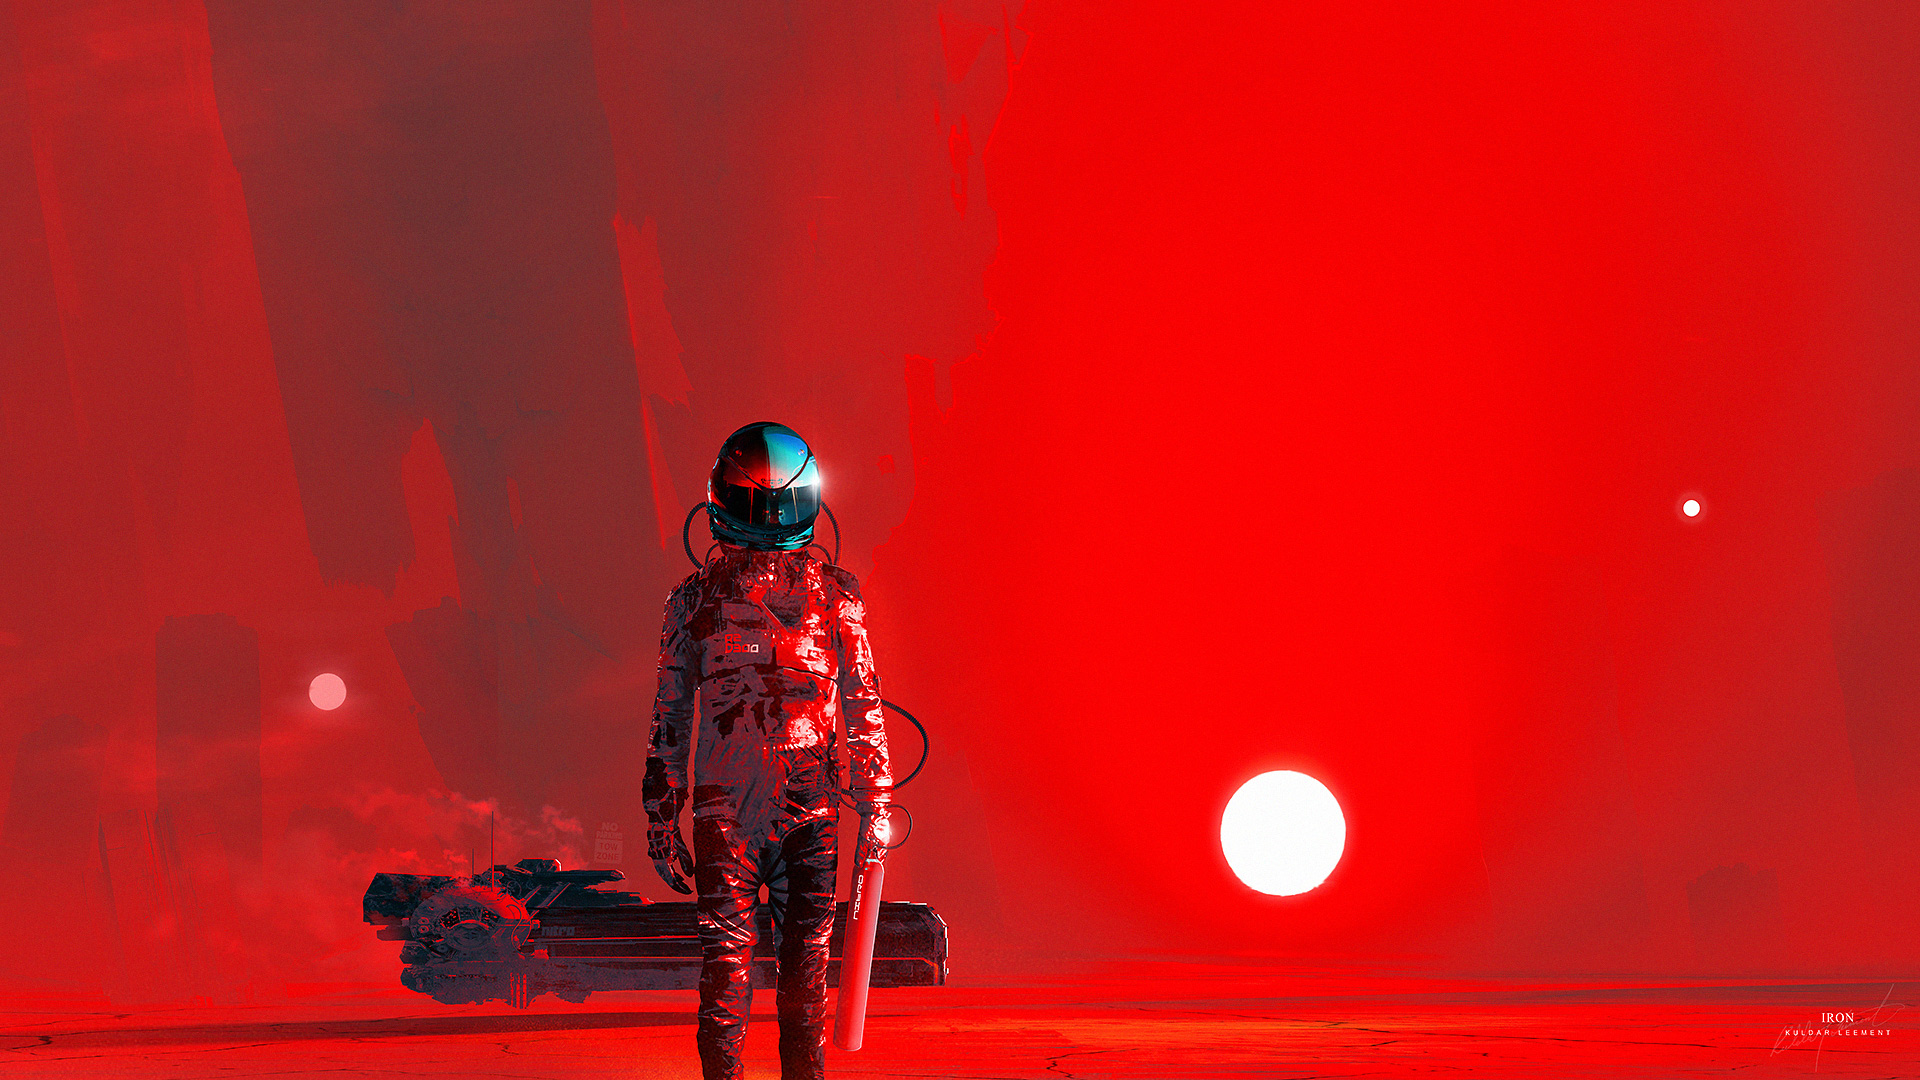 The red planet explorer